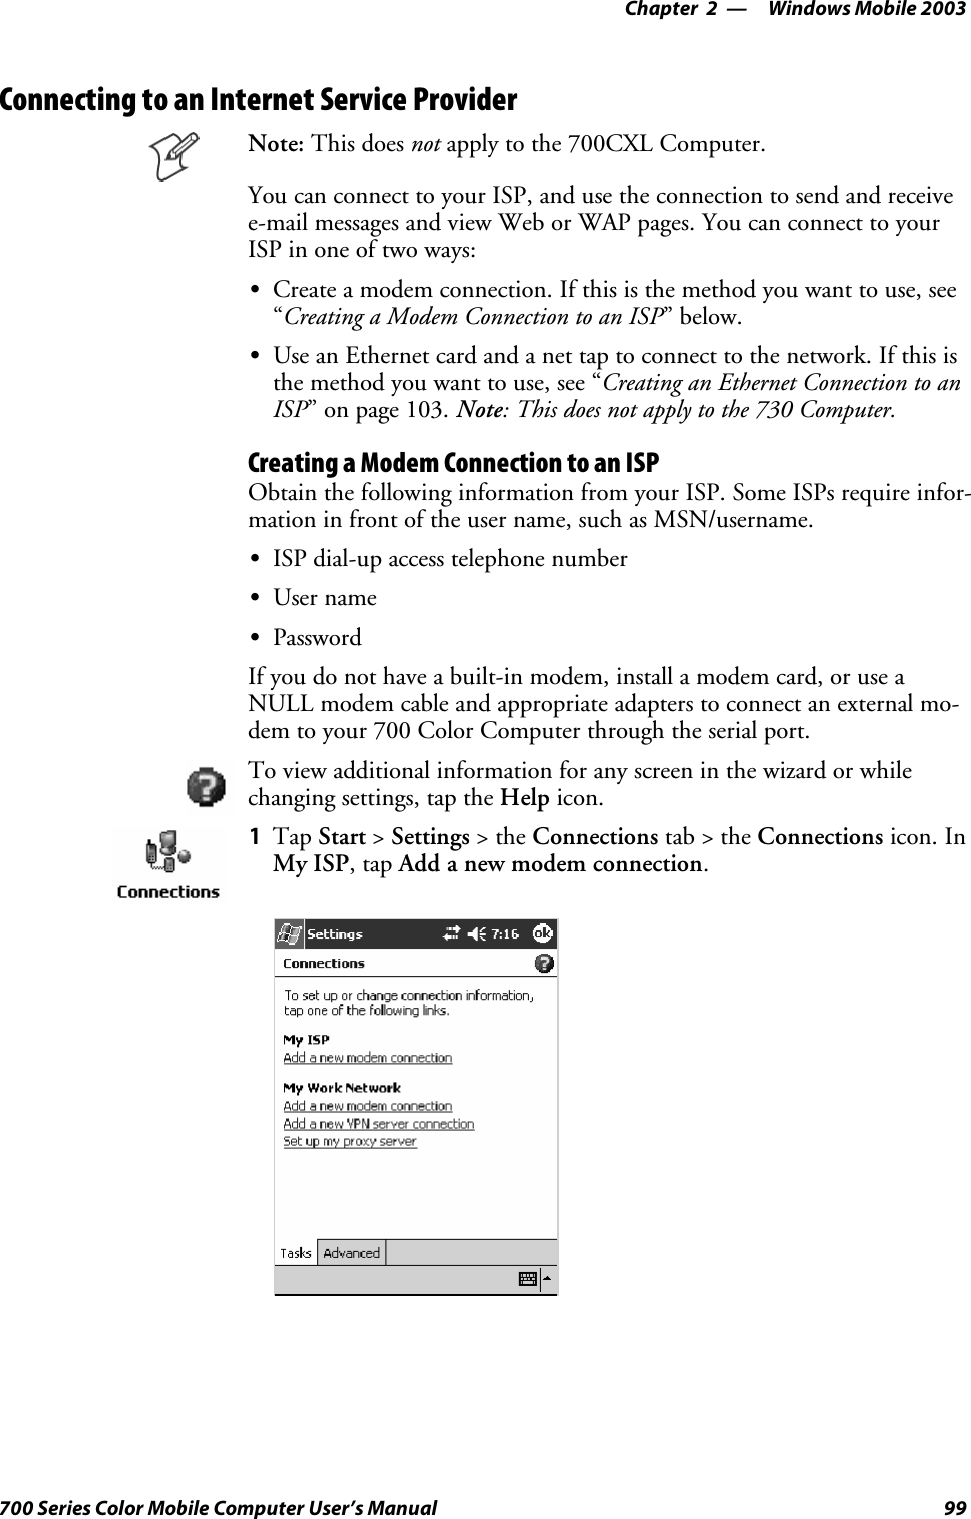 Windows Mobile 2003—Chapter 299700 Series Color Mobile Computer User’s ManualConnecting to an Internet Service ProviderNote: This does not apply to the 700CXL Computer.You can connect to your ISP, and use the connection to send and receivee-mail messages and view Web or WAP pages. You can connect to yourISP in one of two ways:SCreate a modem connection. If this is the method you want to use, see“Creating a Modem Connection to an ISP”below.SUse an Ethernet card and a net tap to connect to the network. If this isthe method you want to use, see “Creating an Ethernet Connection to anISP” on page 103. Note:Thisdoesnotapplytothe730Computer.Creating a Modem Connection to an ISPObtain the following information from your ISP. Some ISPs require infor-mation in front of the user name, such as MSN/username.SISP dial-up access telephone numberSUser nameSPasswordIf you do not have a built-in modem, install a modem card, or use aNULL modem cable and appropriate adapters to connect an external mo-dem to your 700 Color Computer through the serial port.To view additional information for any screen in the wizard or whilechanging settings, tap the Help icon.1Tap Start &gt;Settings &gt;theConnections tab&gt;theConnections icon. InMy ISP,tapAdd a new modem connection.